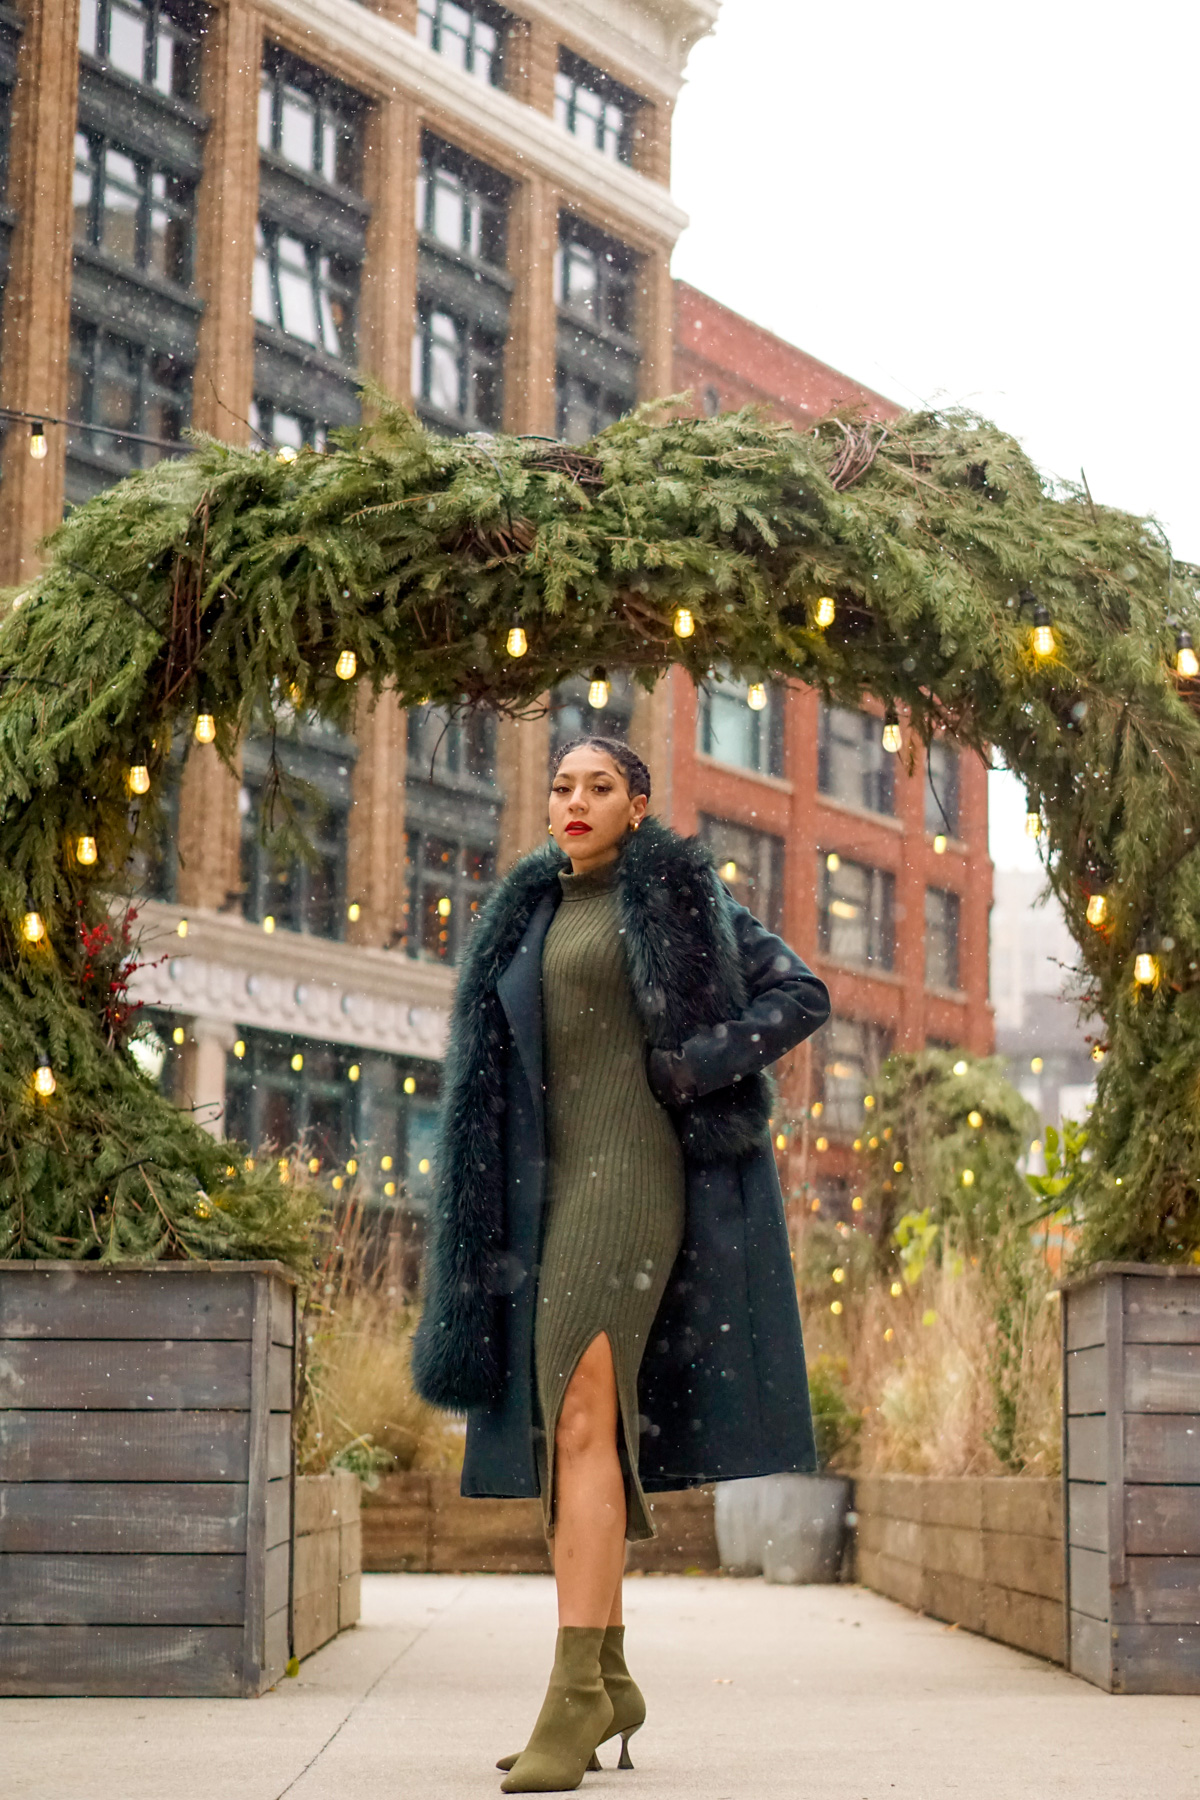 chic Christmas outfit idea for pear shaped women, black fashion blogger style outfits, Christmas holiday party outfit, green outfit ideas